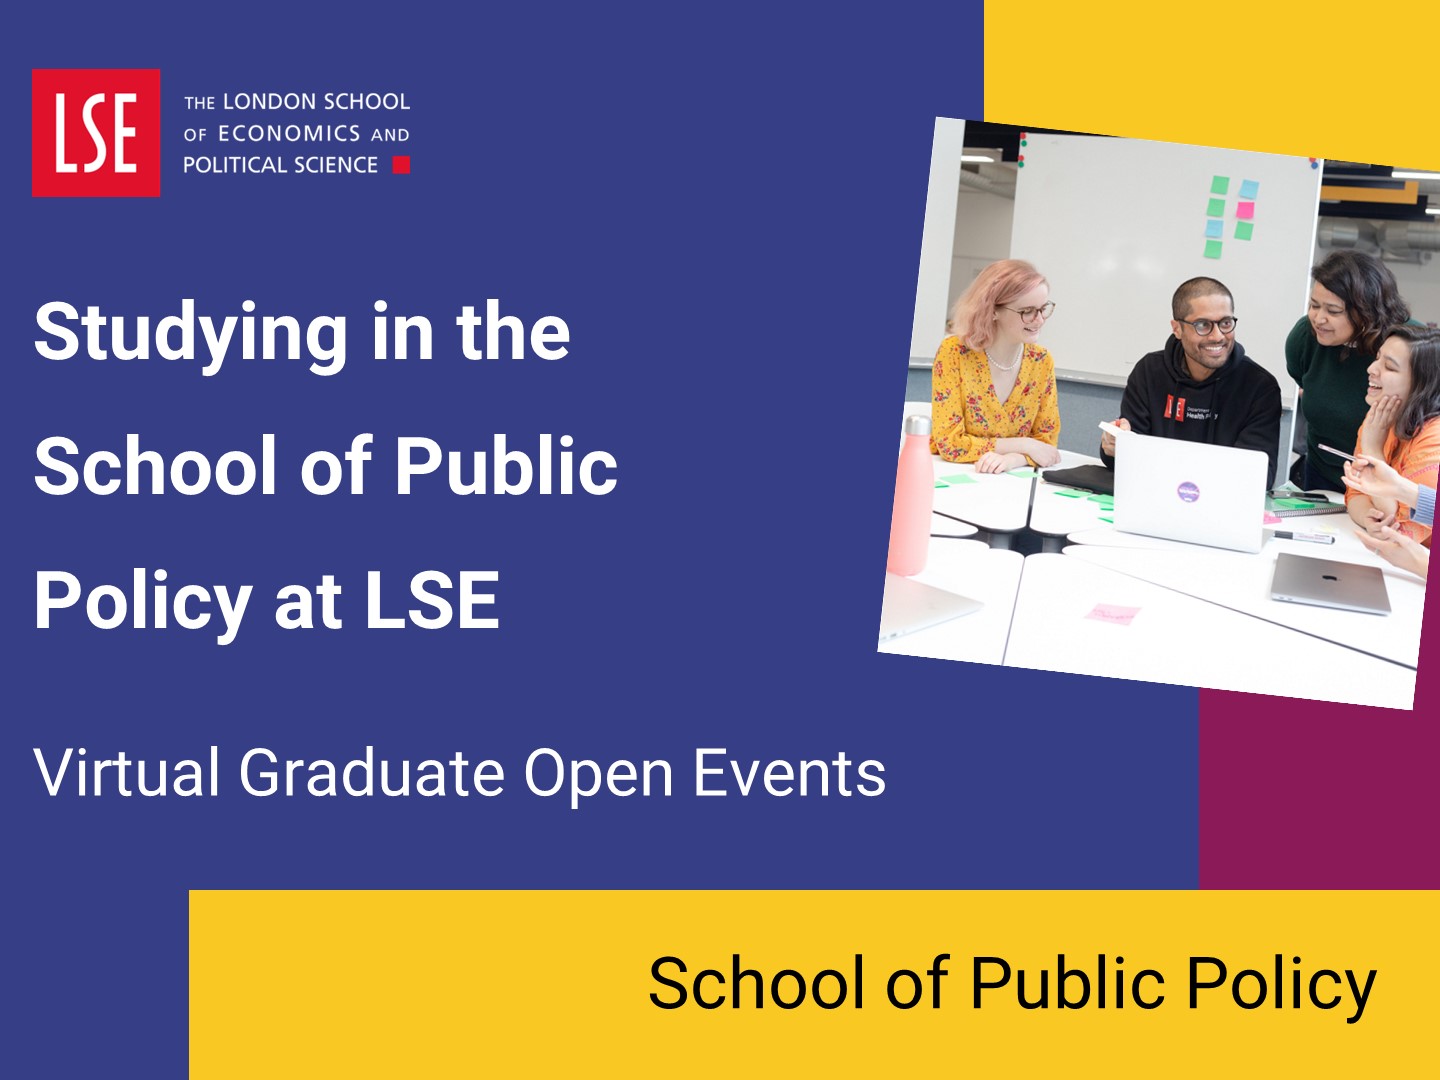 Studying in the School of Public Policy at LSE